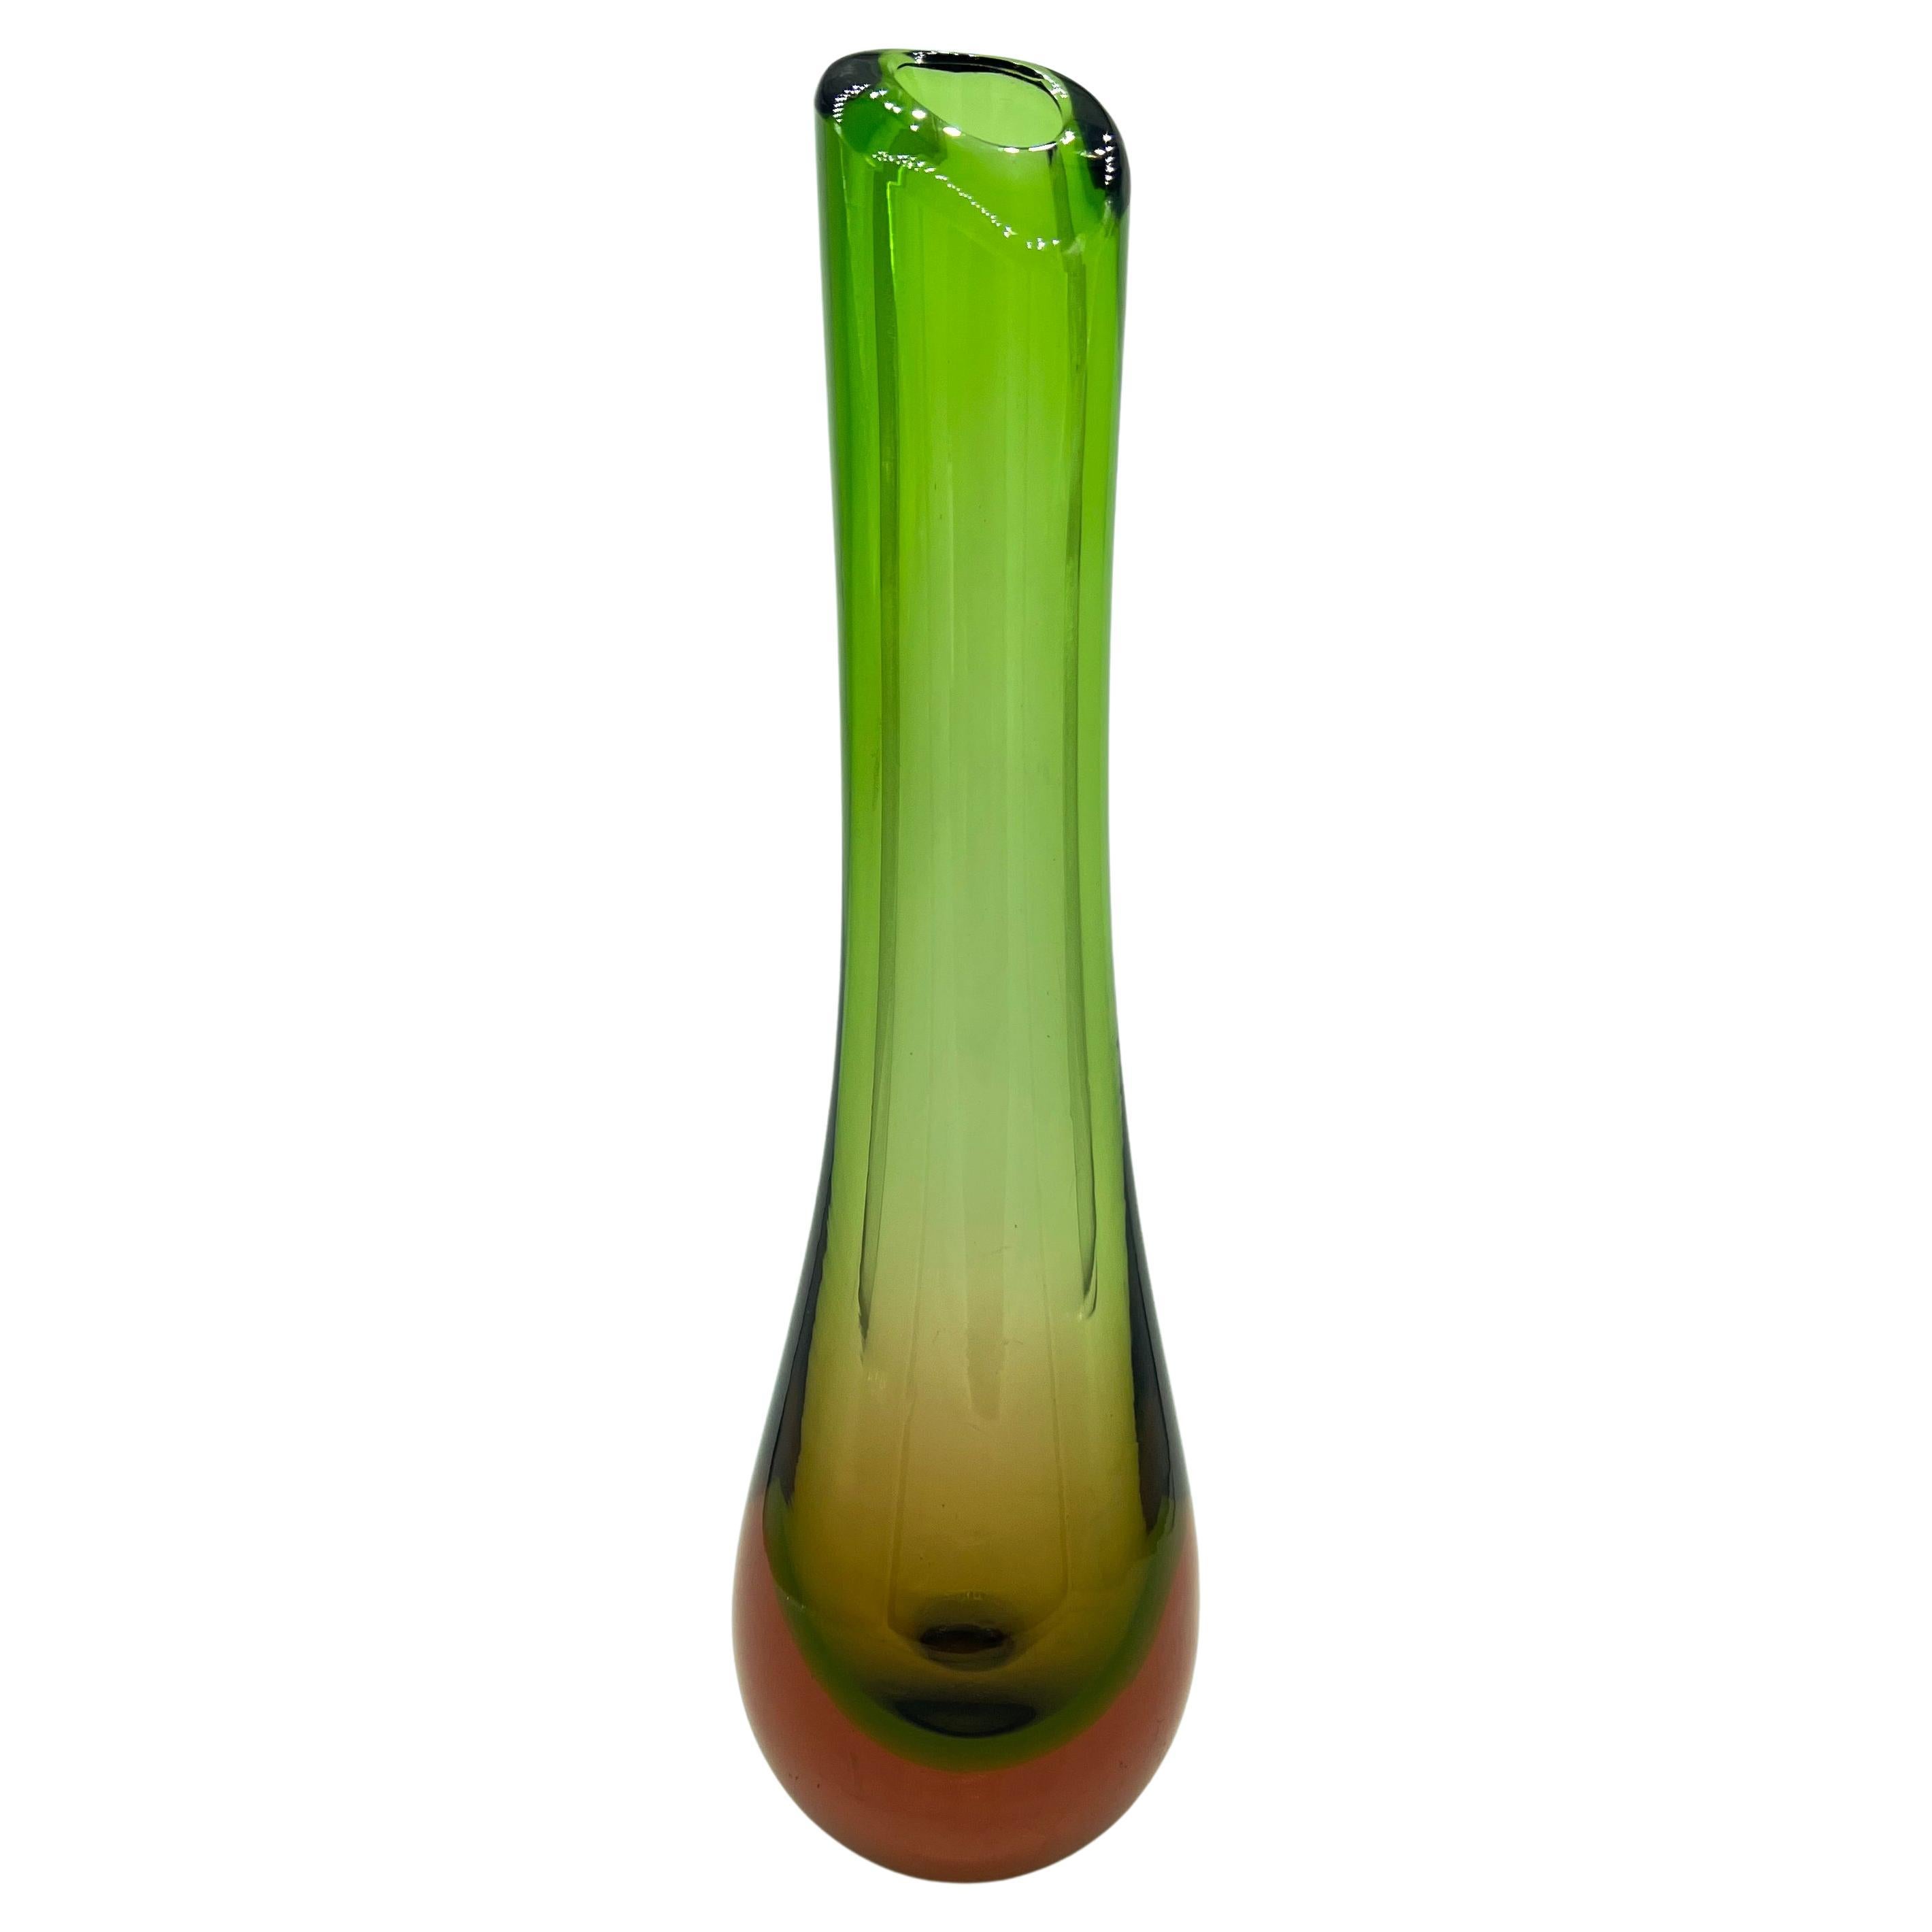 Vintage Big, Tall and Heavy Murano Vase in Green and Orange "Sommerso" Glass For Sale